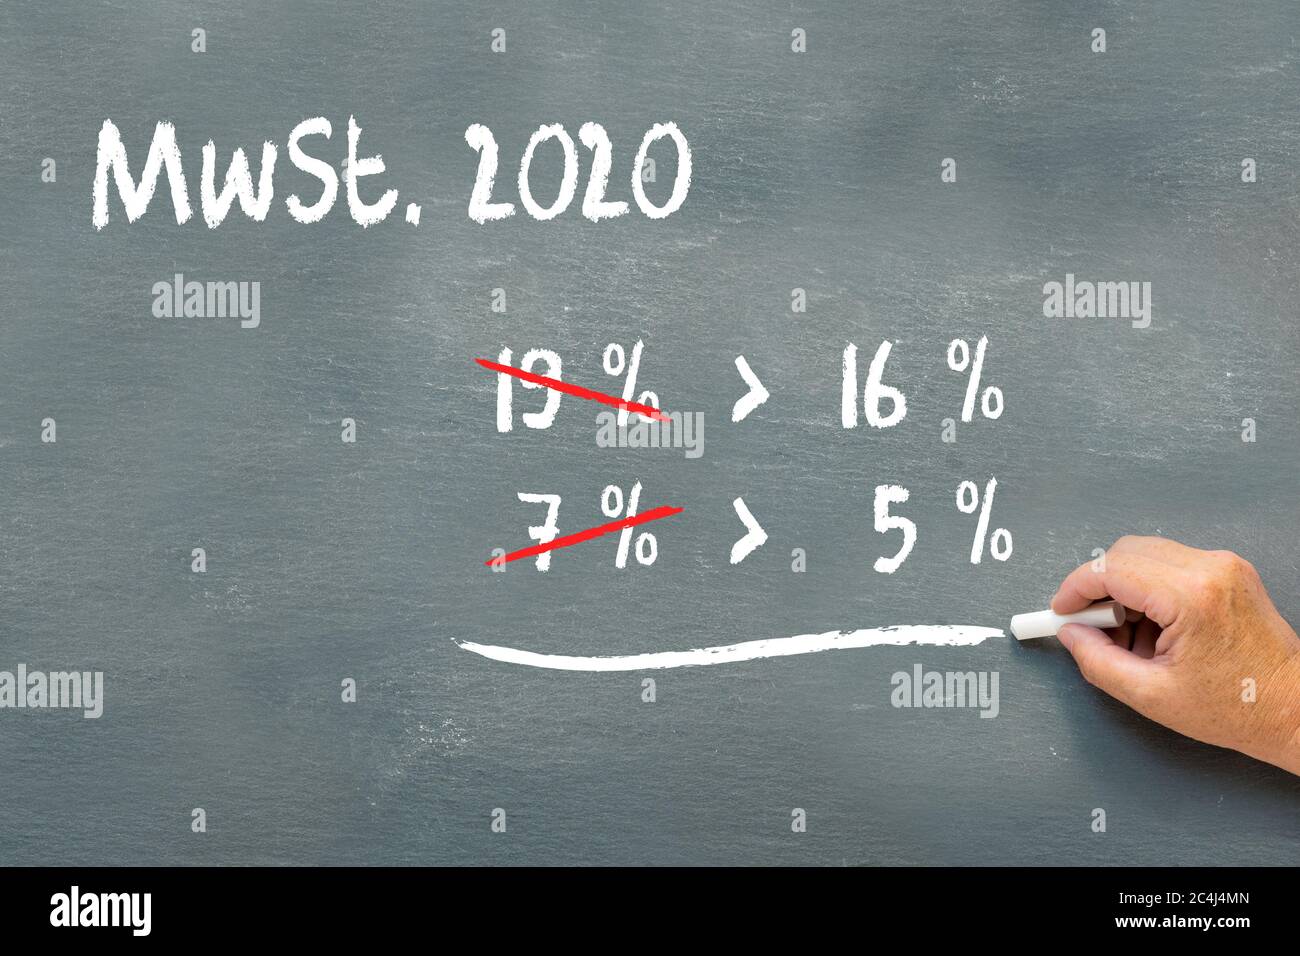 German economic stimulus package after the coronavirus crisis lowers costs written on a chalkboard, MwSt 2020 (value added tax) reduction from 19 % to Stock Photo